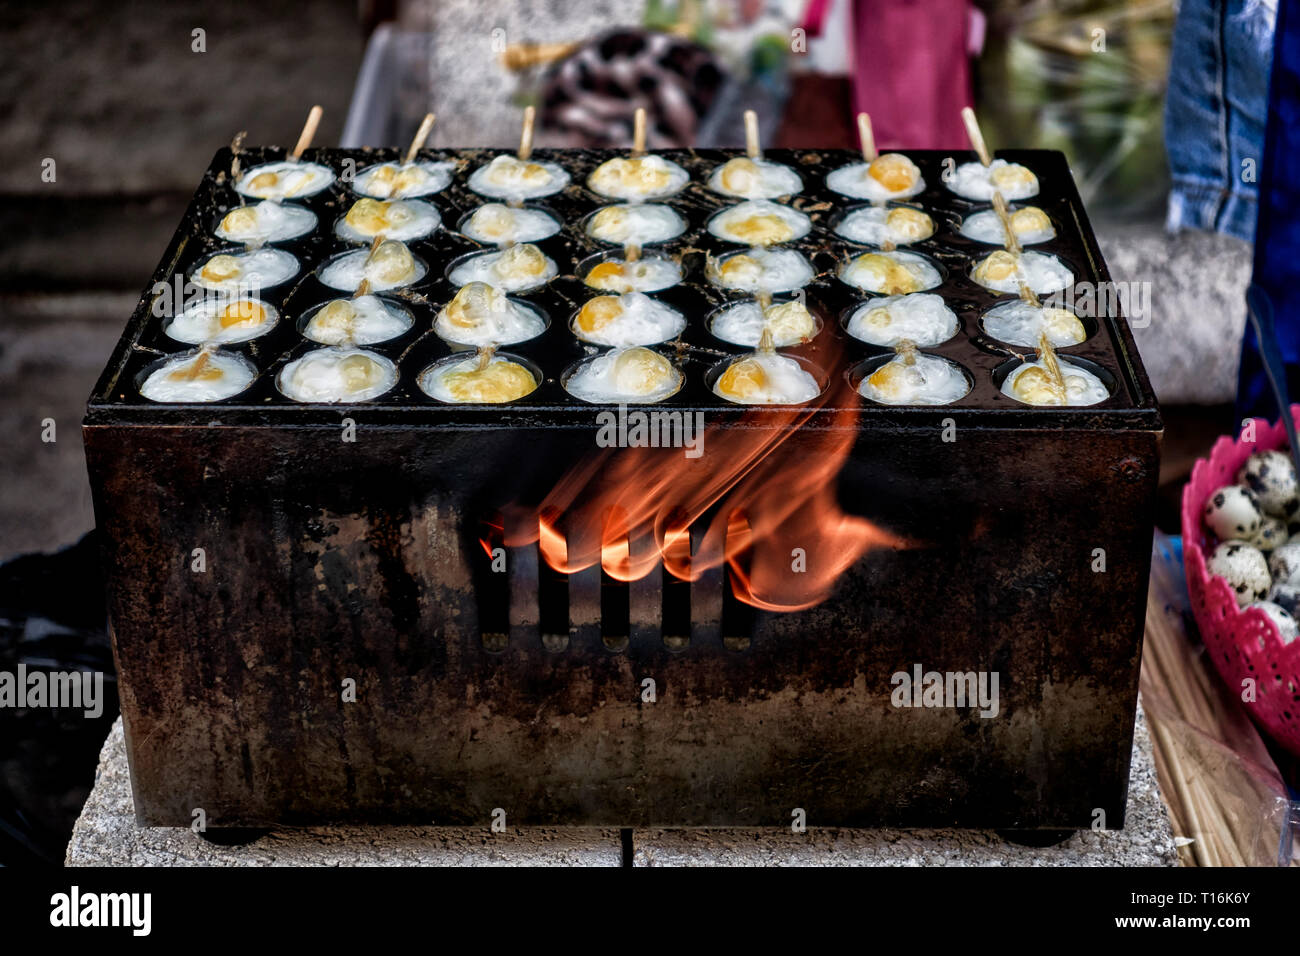 Thailand street food with quail eggs cooking on a flame stove at a Thai market stall. Stock Photo